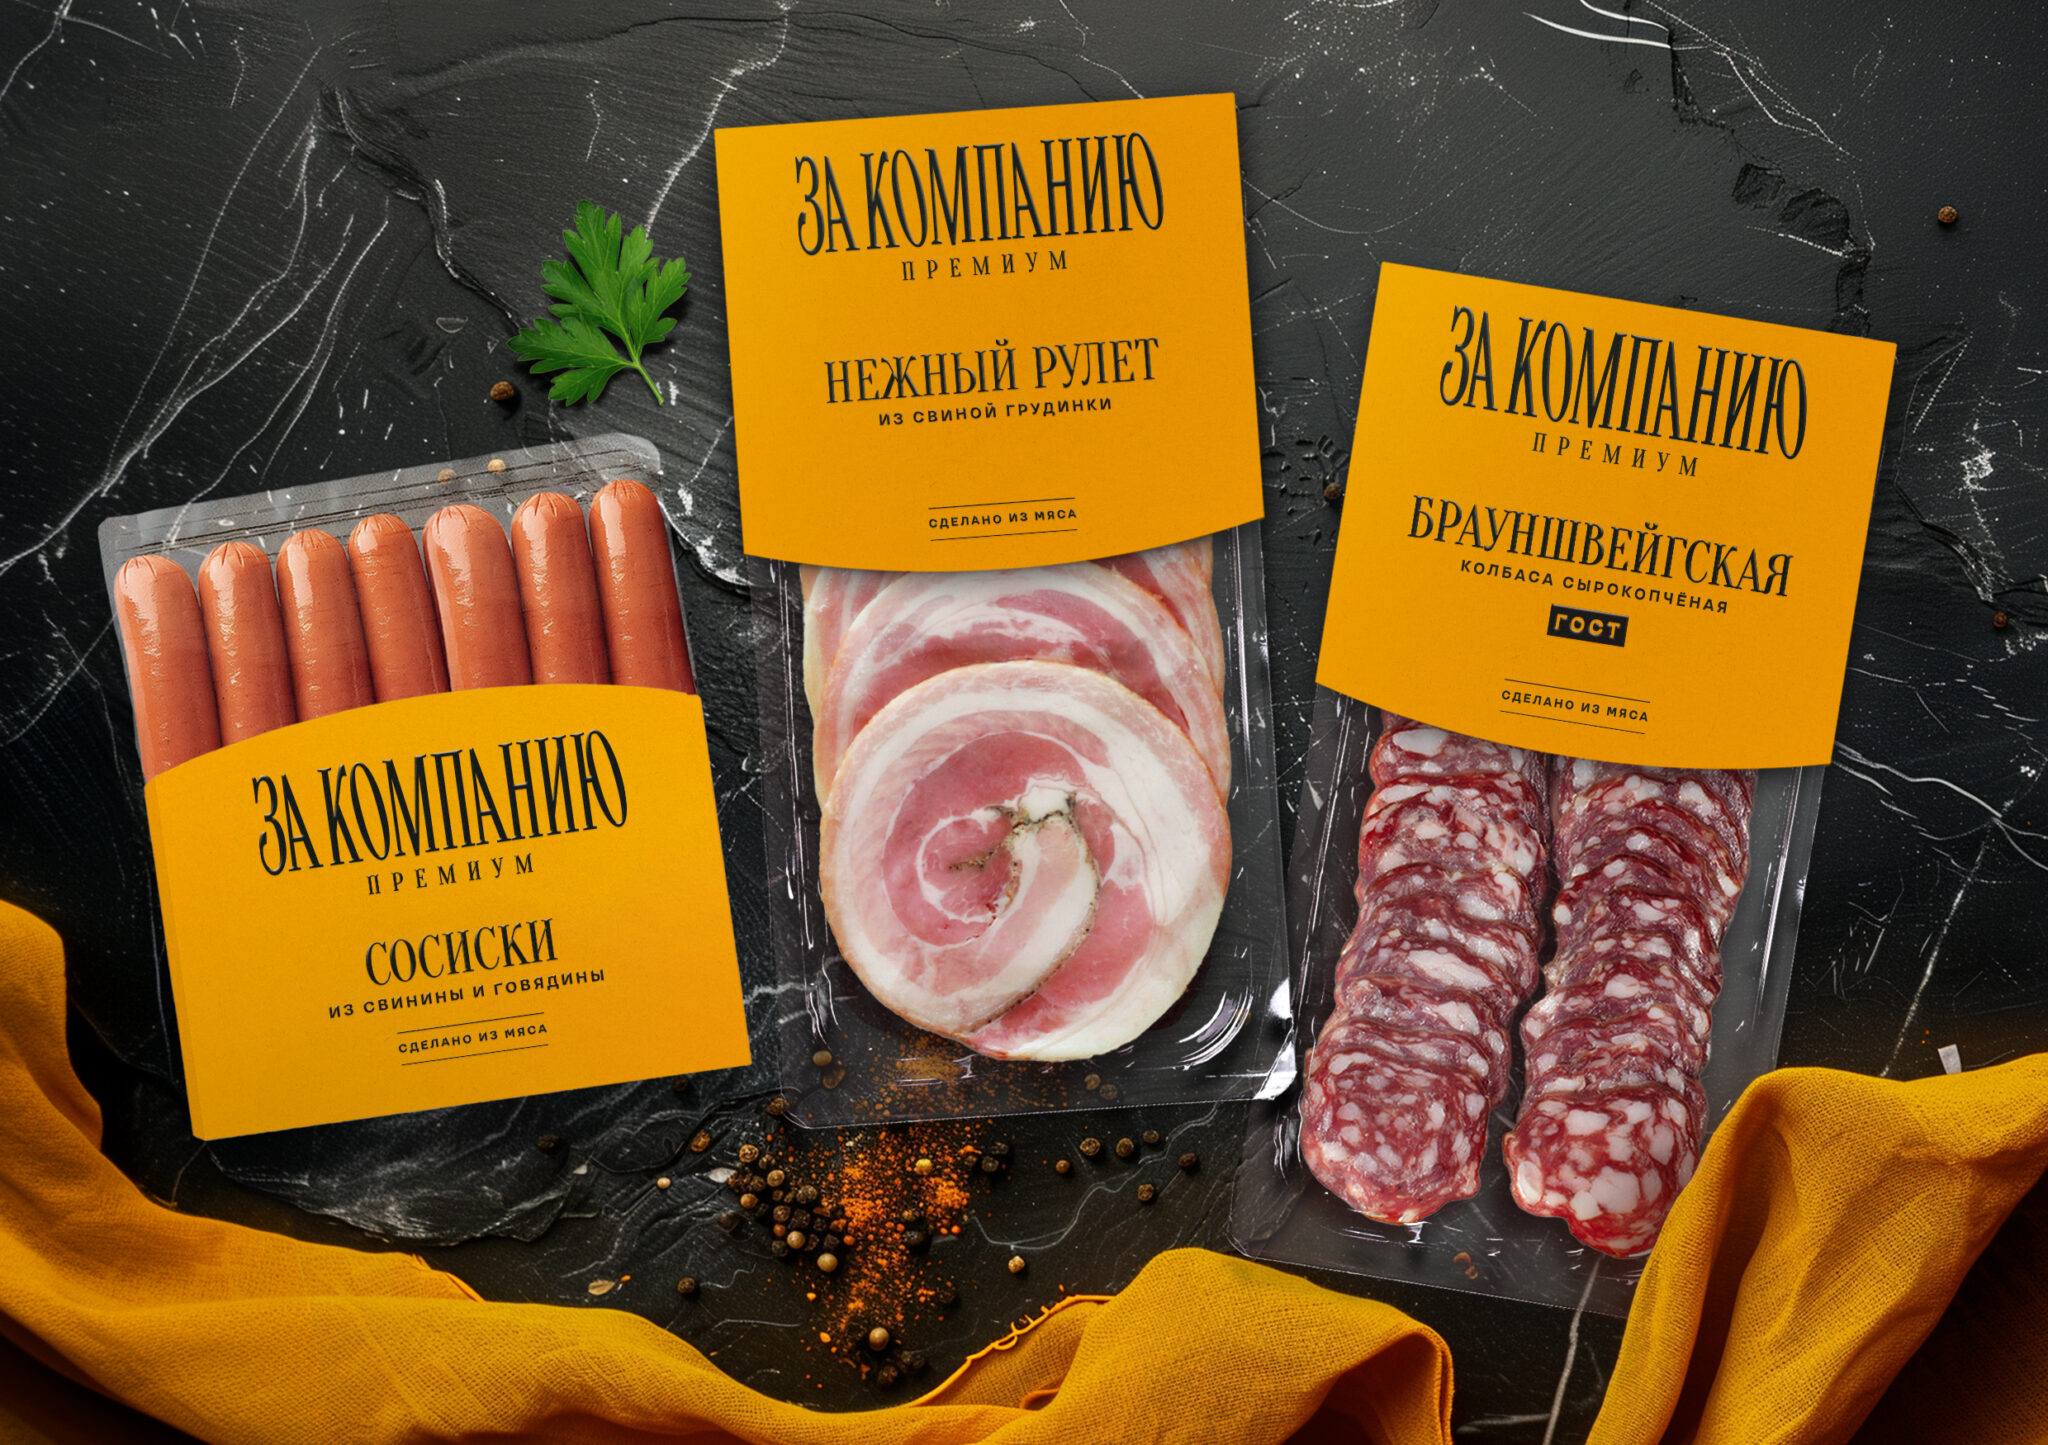 Ohmybrand’s New ‘Join In’ Brand: Bringing Ipatov’s Meat Delicacies to Everyday Tables